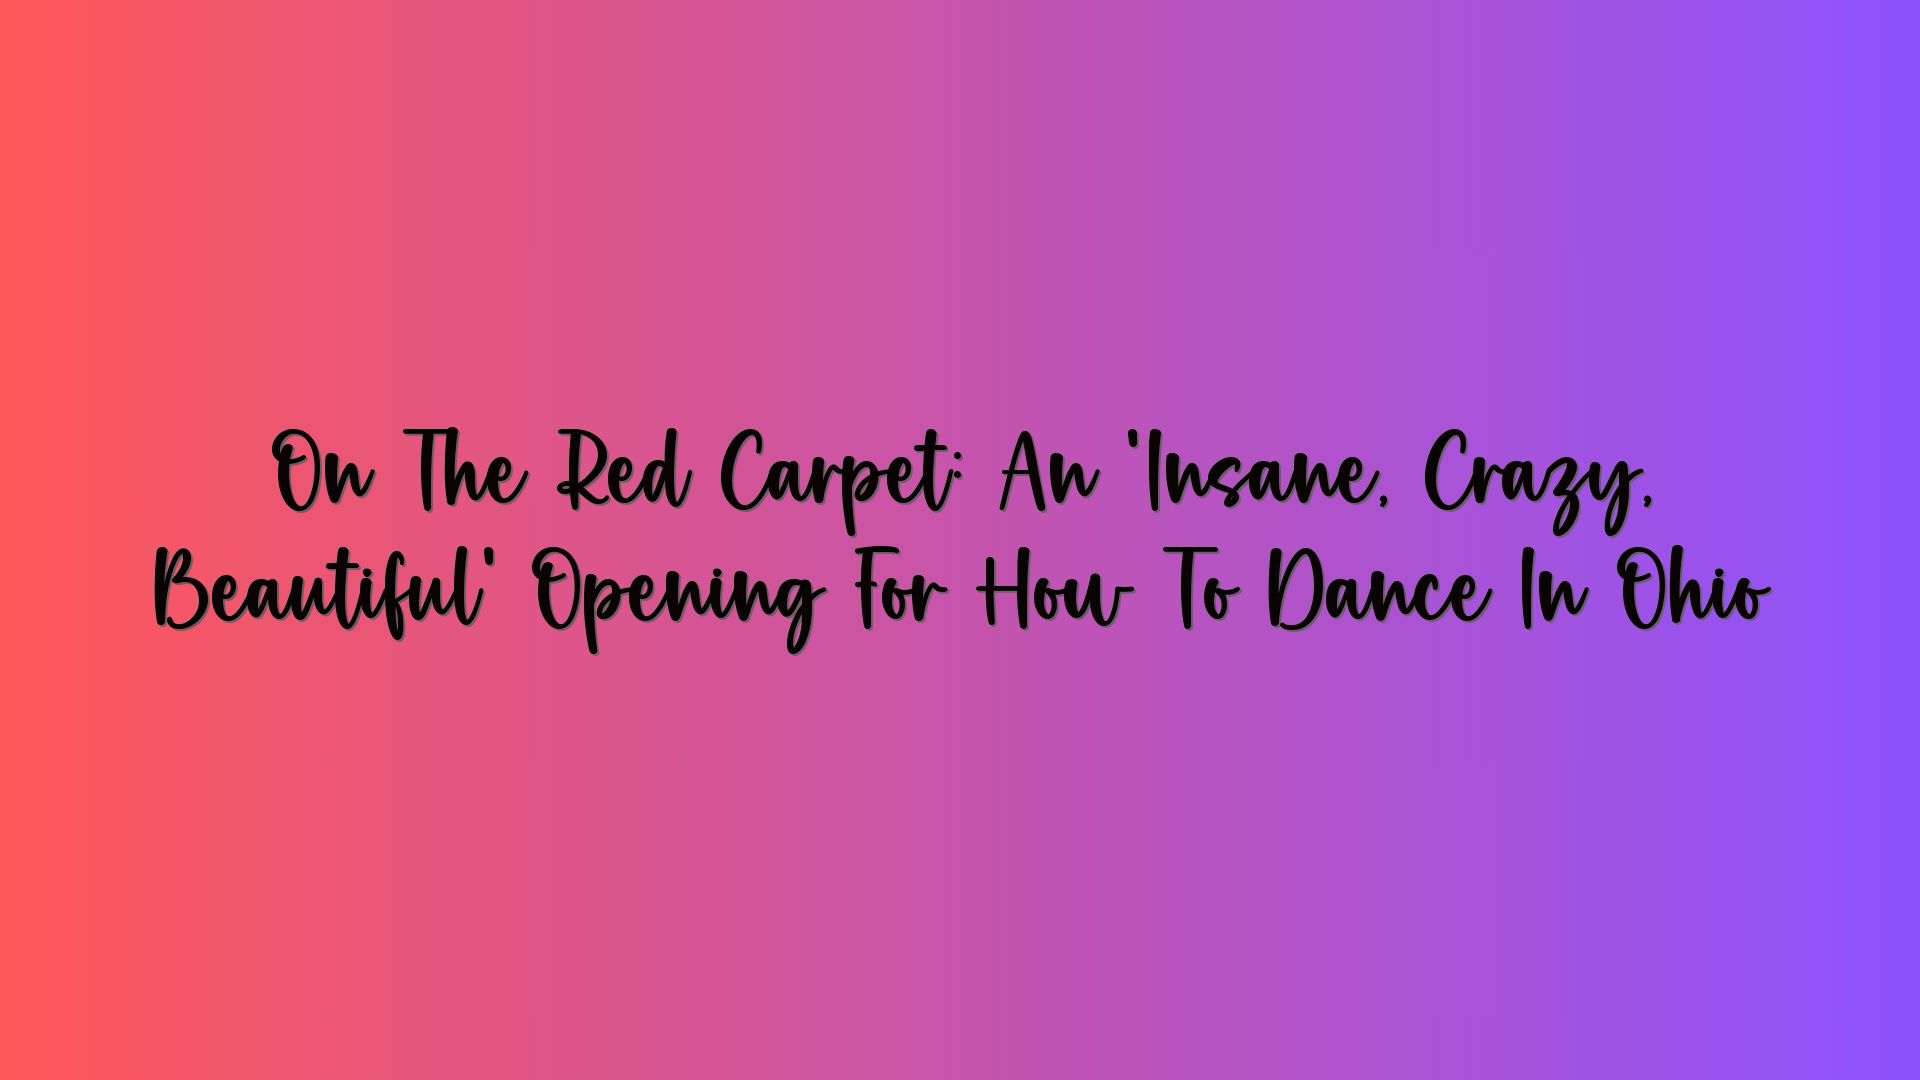 On The Red Carpet: An ‘Insane, Crazy, Beautiful’ Opening For How To Dance In Ohio